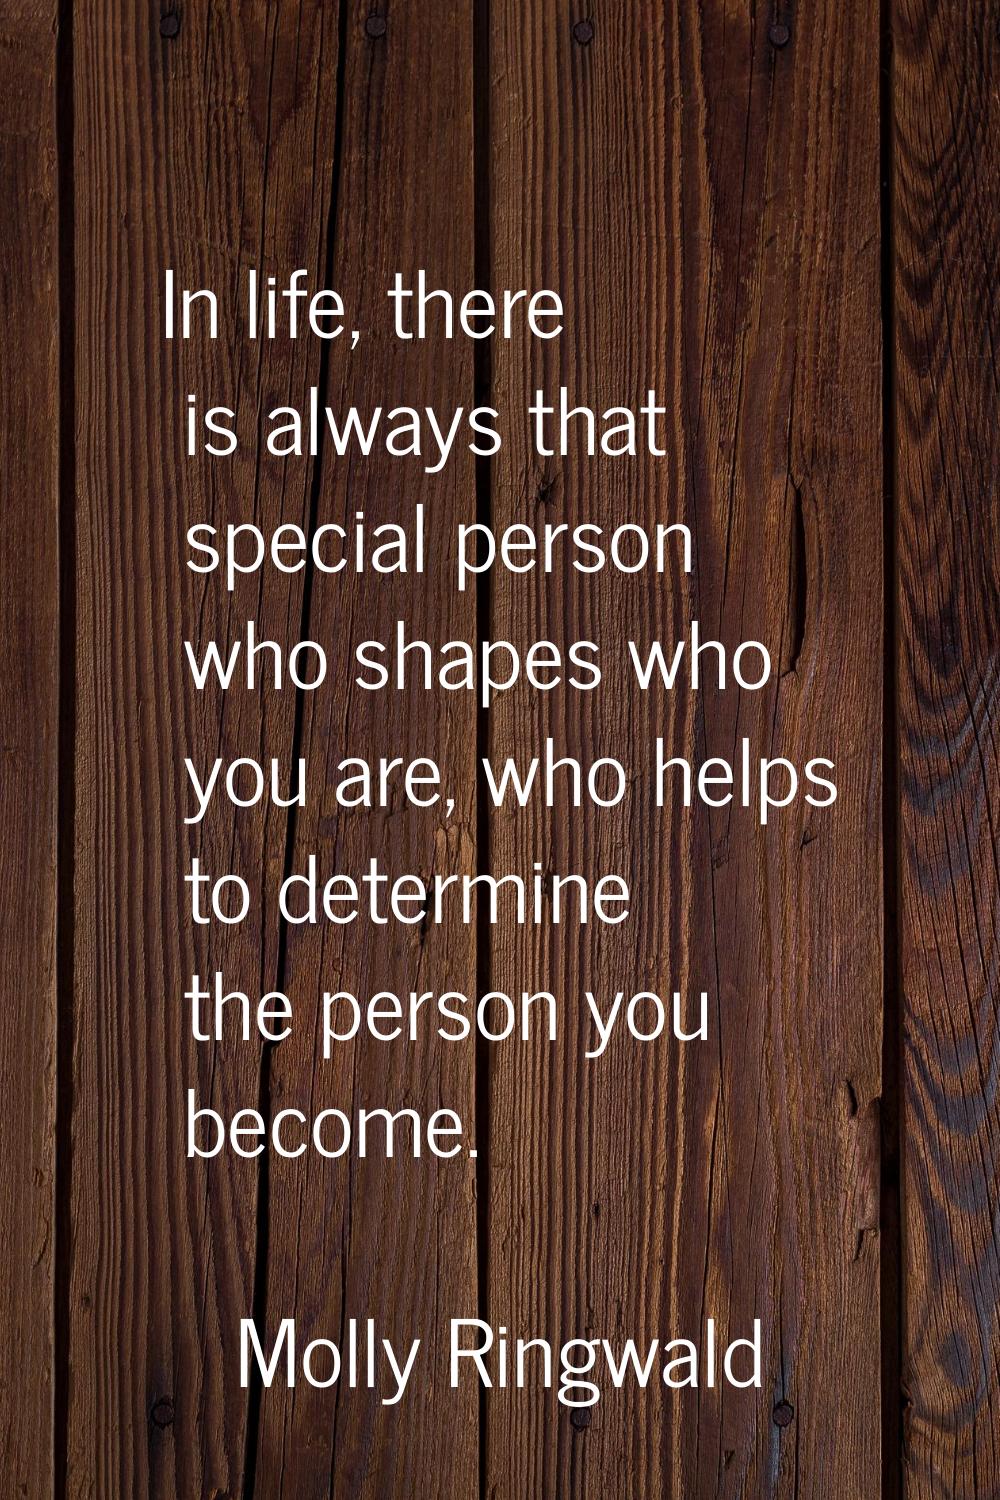 In life, there is always that special person who shapes who you are, who helps to determine the per